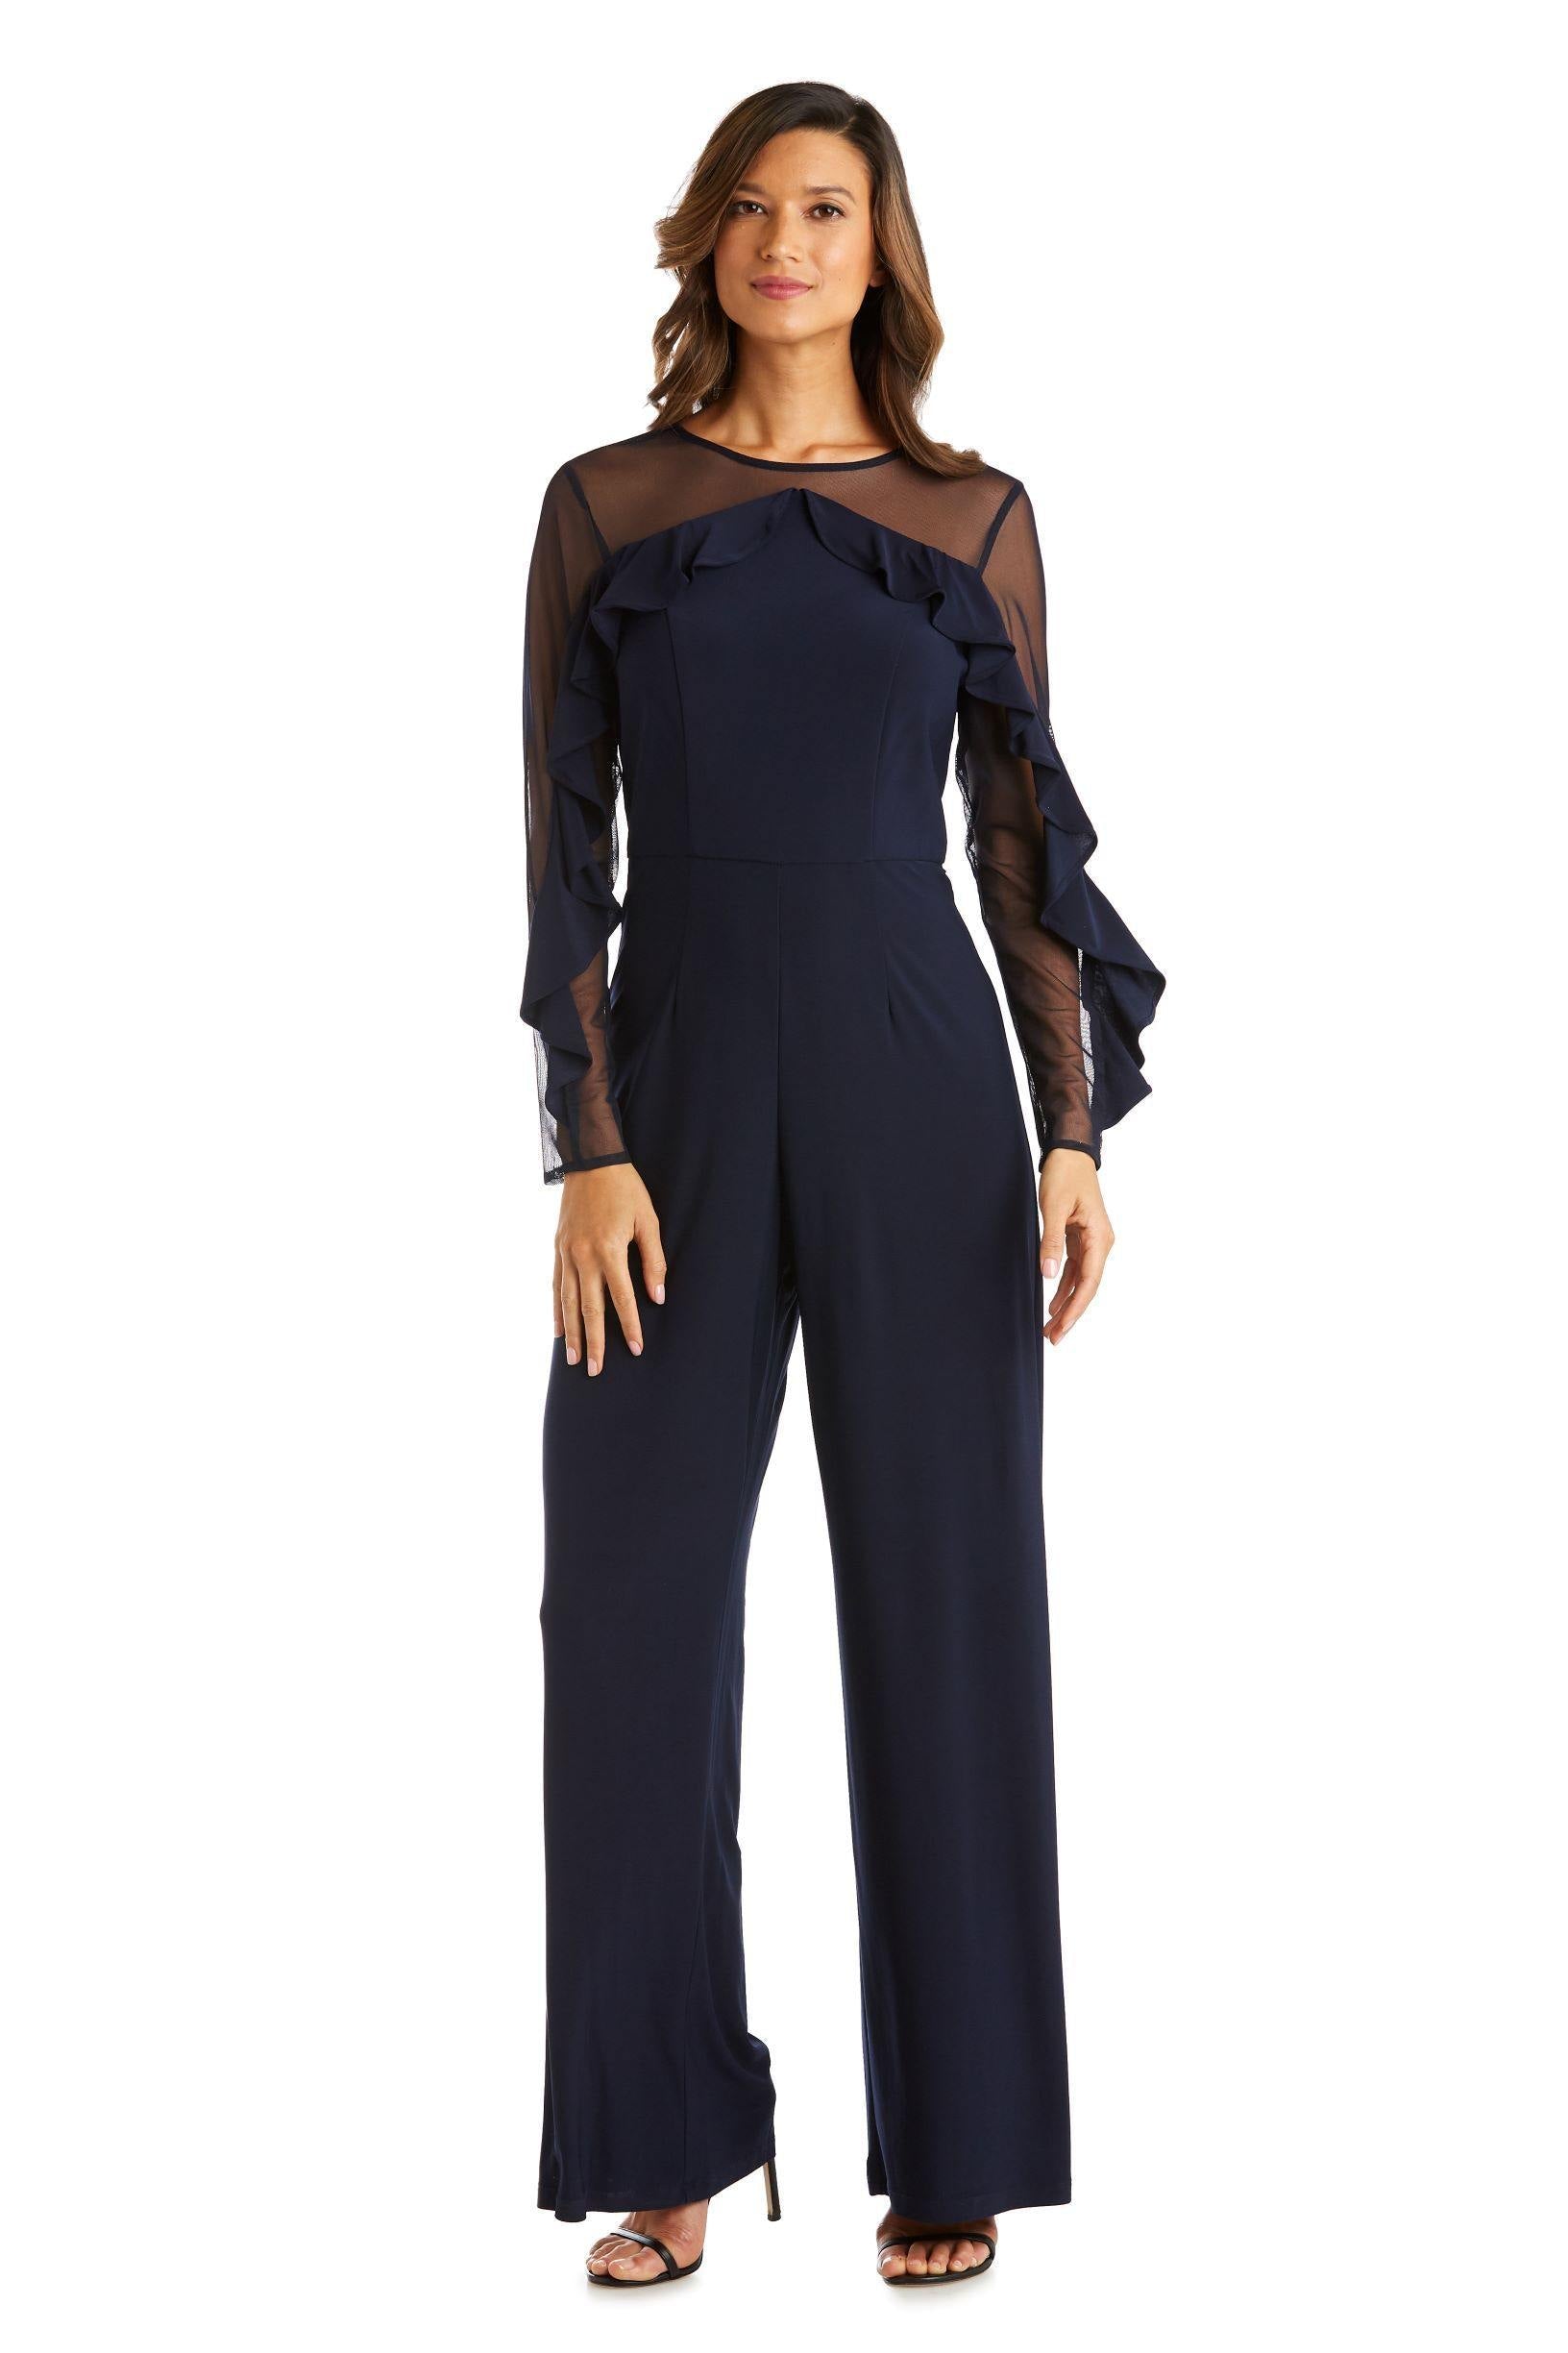 R&M Richards Long Mother of the Bride Jumpsuit 2308 - The Dress Outlet